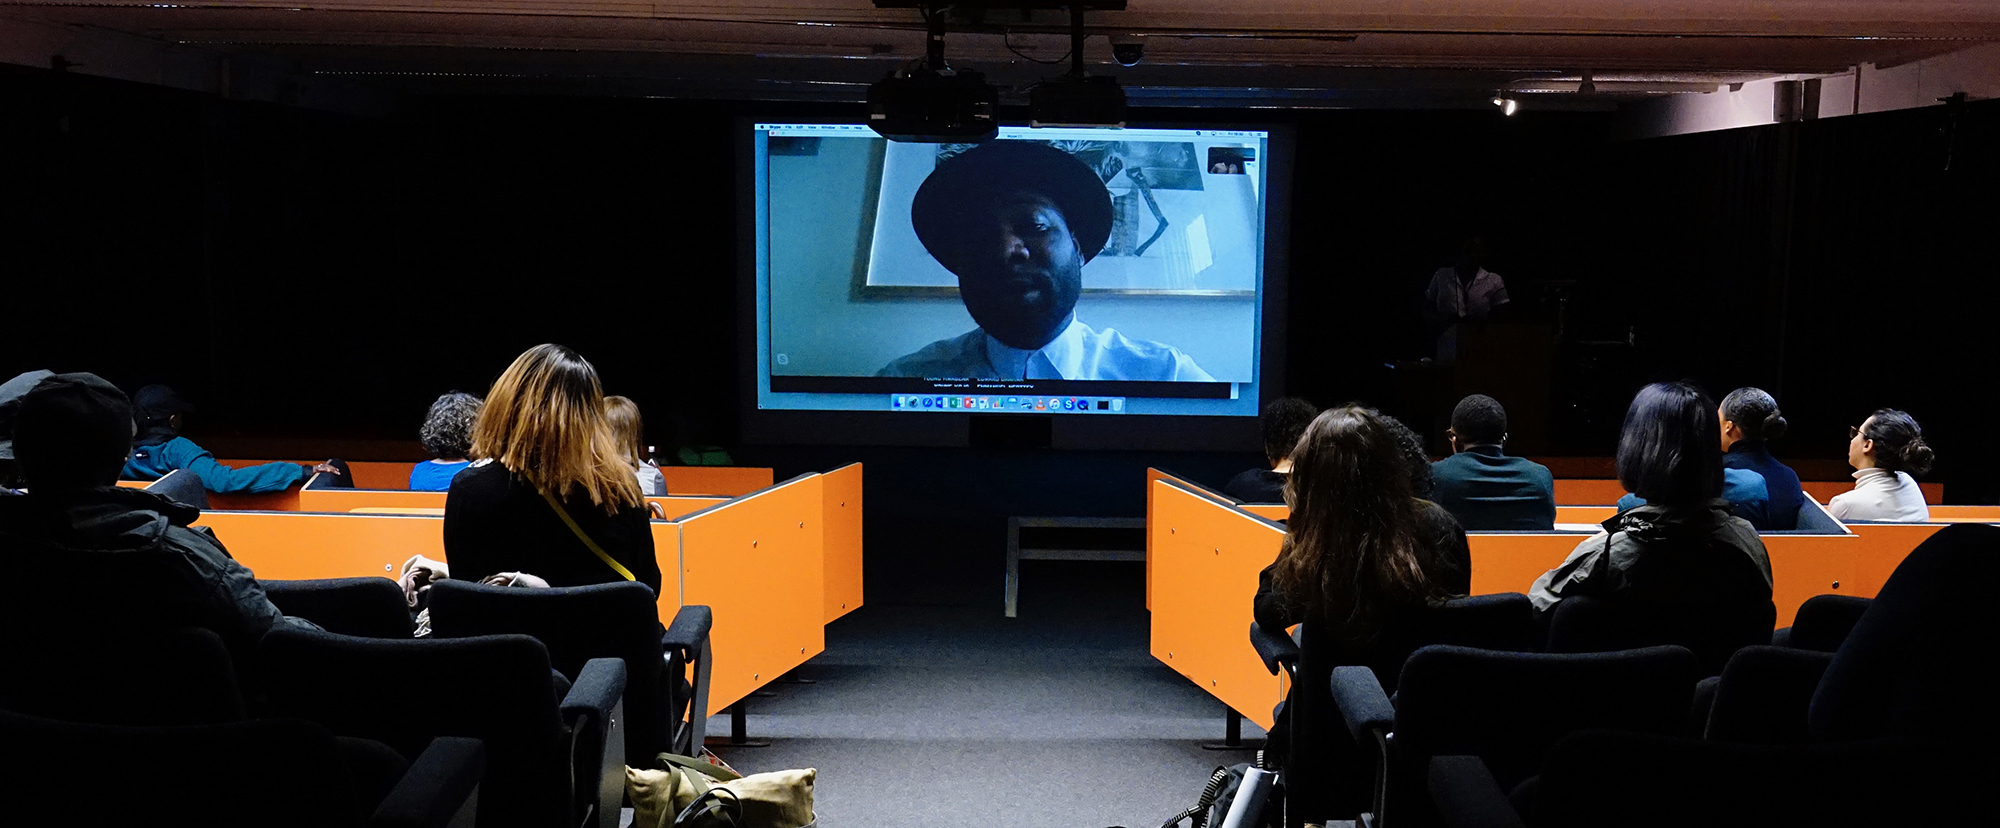 A shot of a skype conversation in a lecture theatre